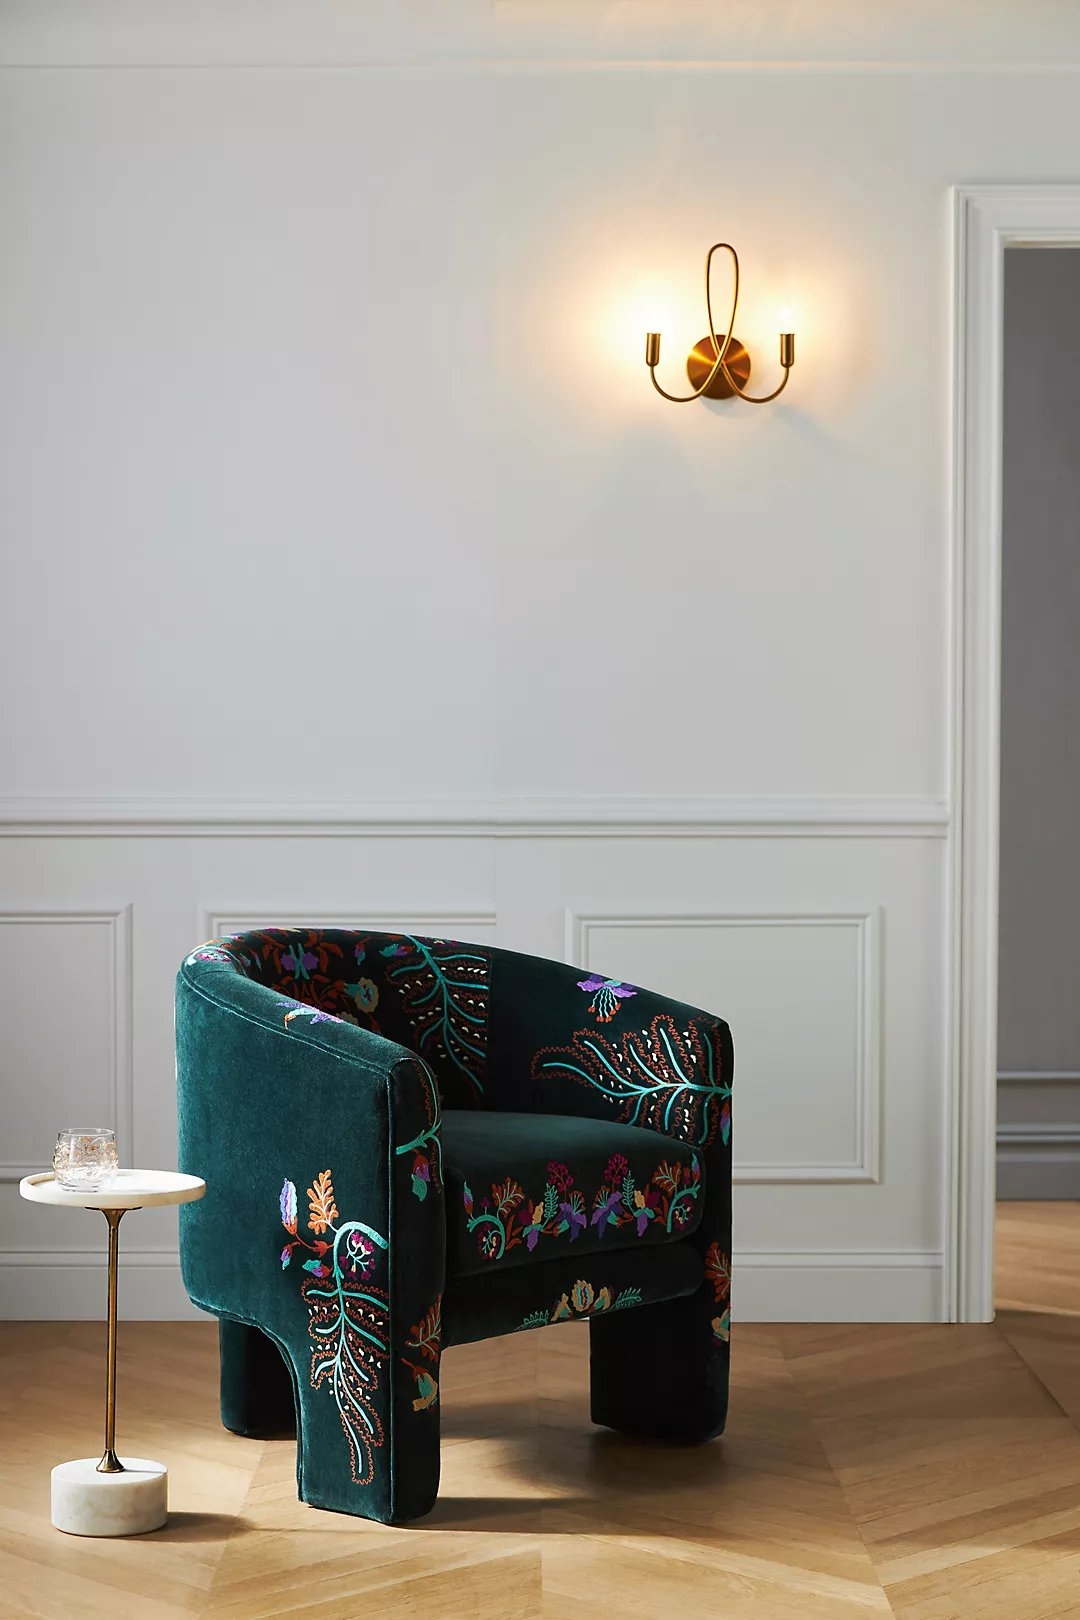 Floral Effie Accent Chair By Anthropologie in Blue - Image 1